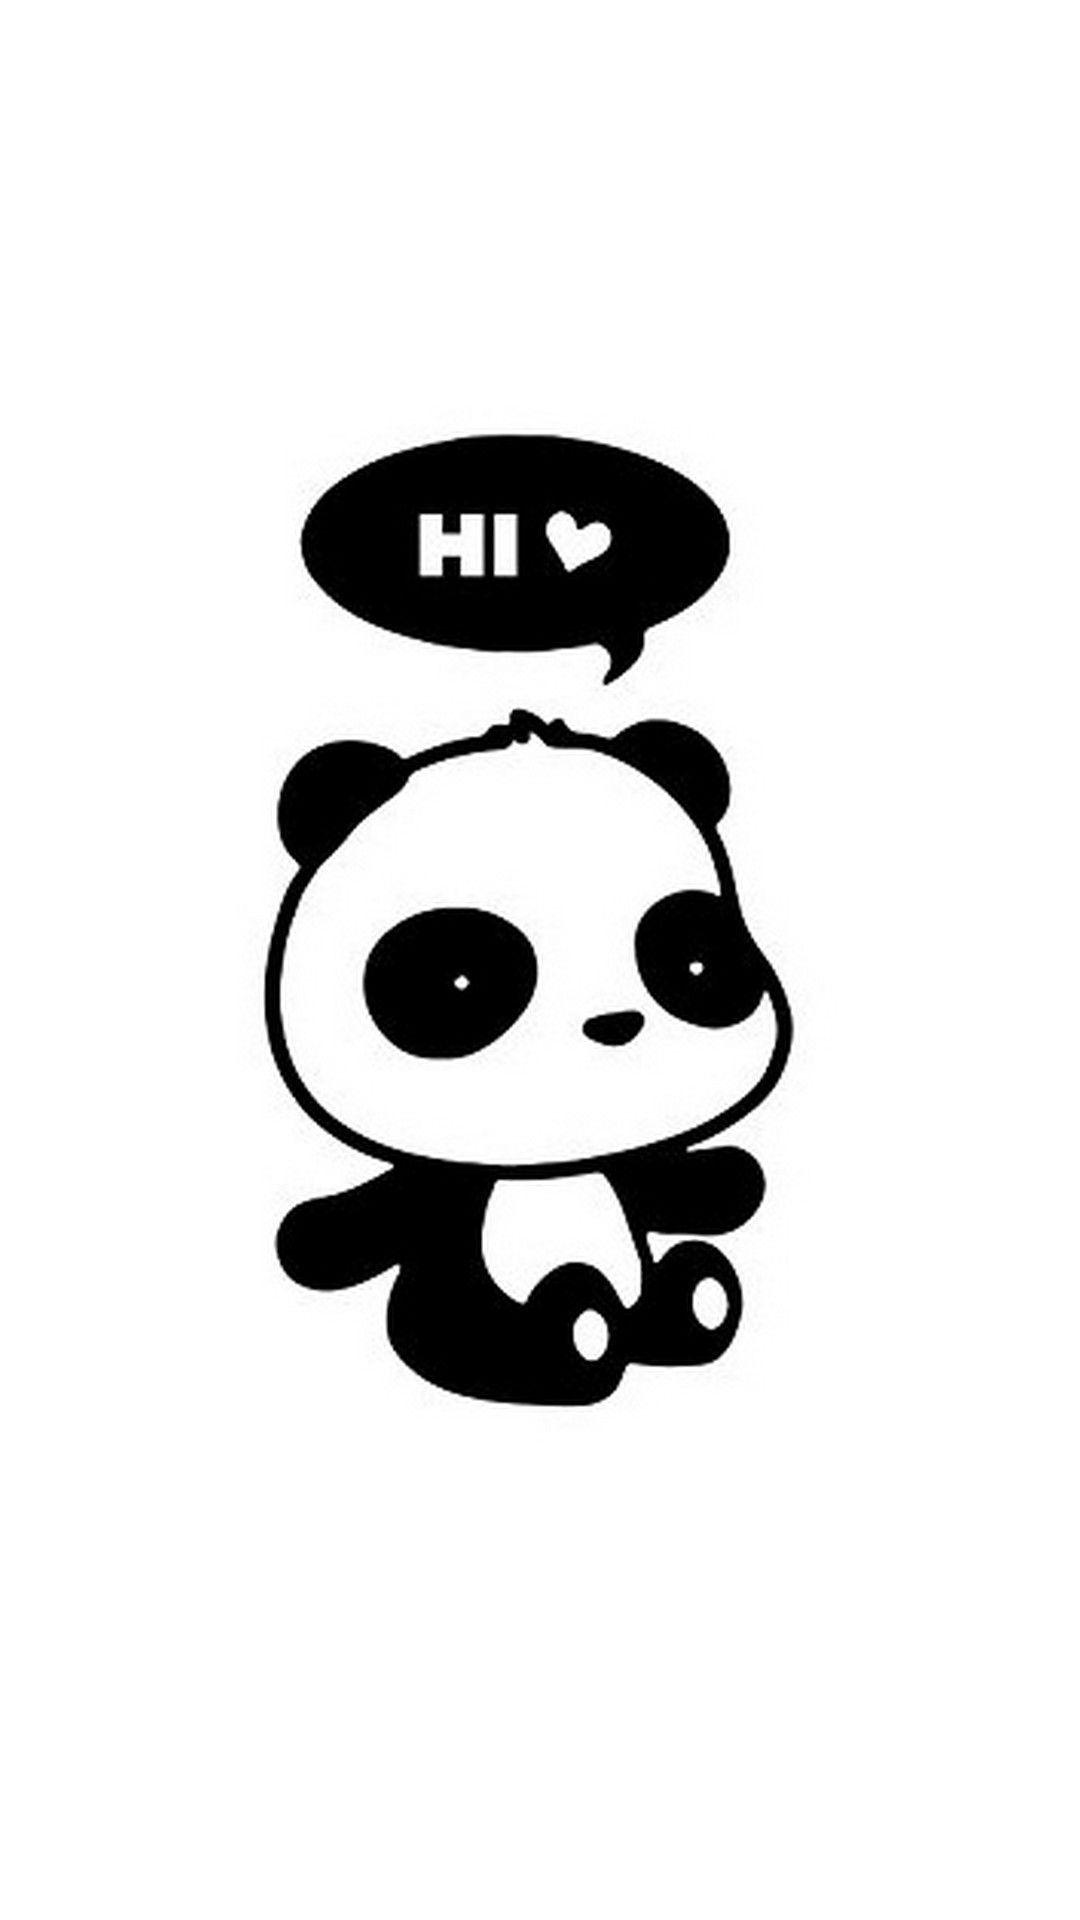 Cute Baby Panda Wallpaper For Android. Best HD Wallpaper